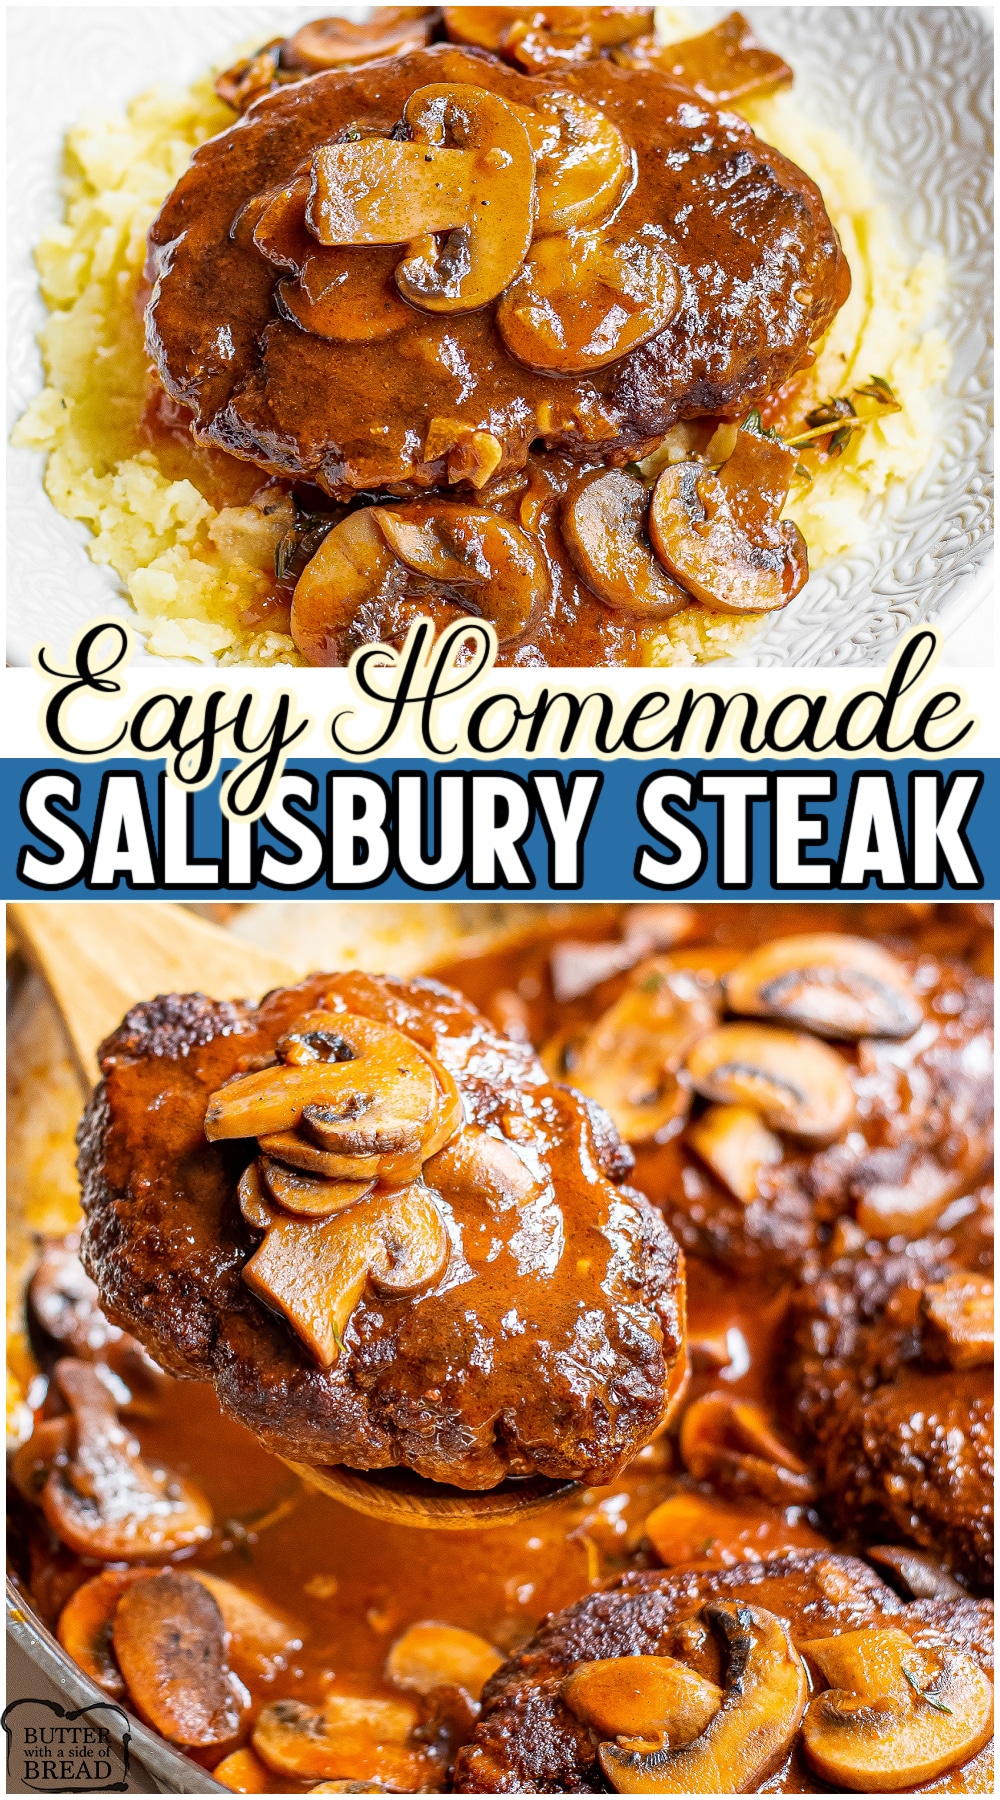 This delicious old-fashioned Salisbury steak recipe is made from scratch and tastes incredible! Classic ingredients for this comforting salisbury steak dinner that everyone craves.